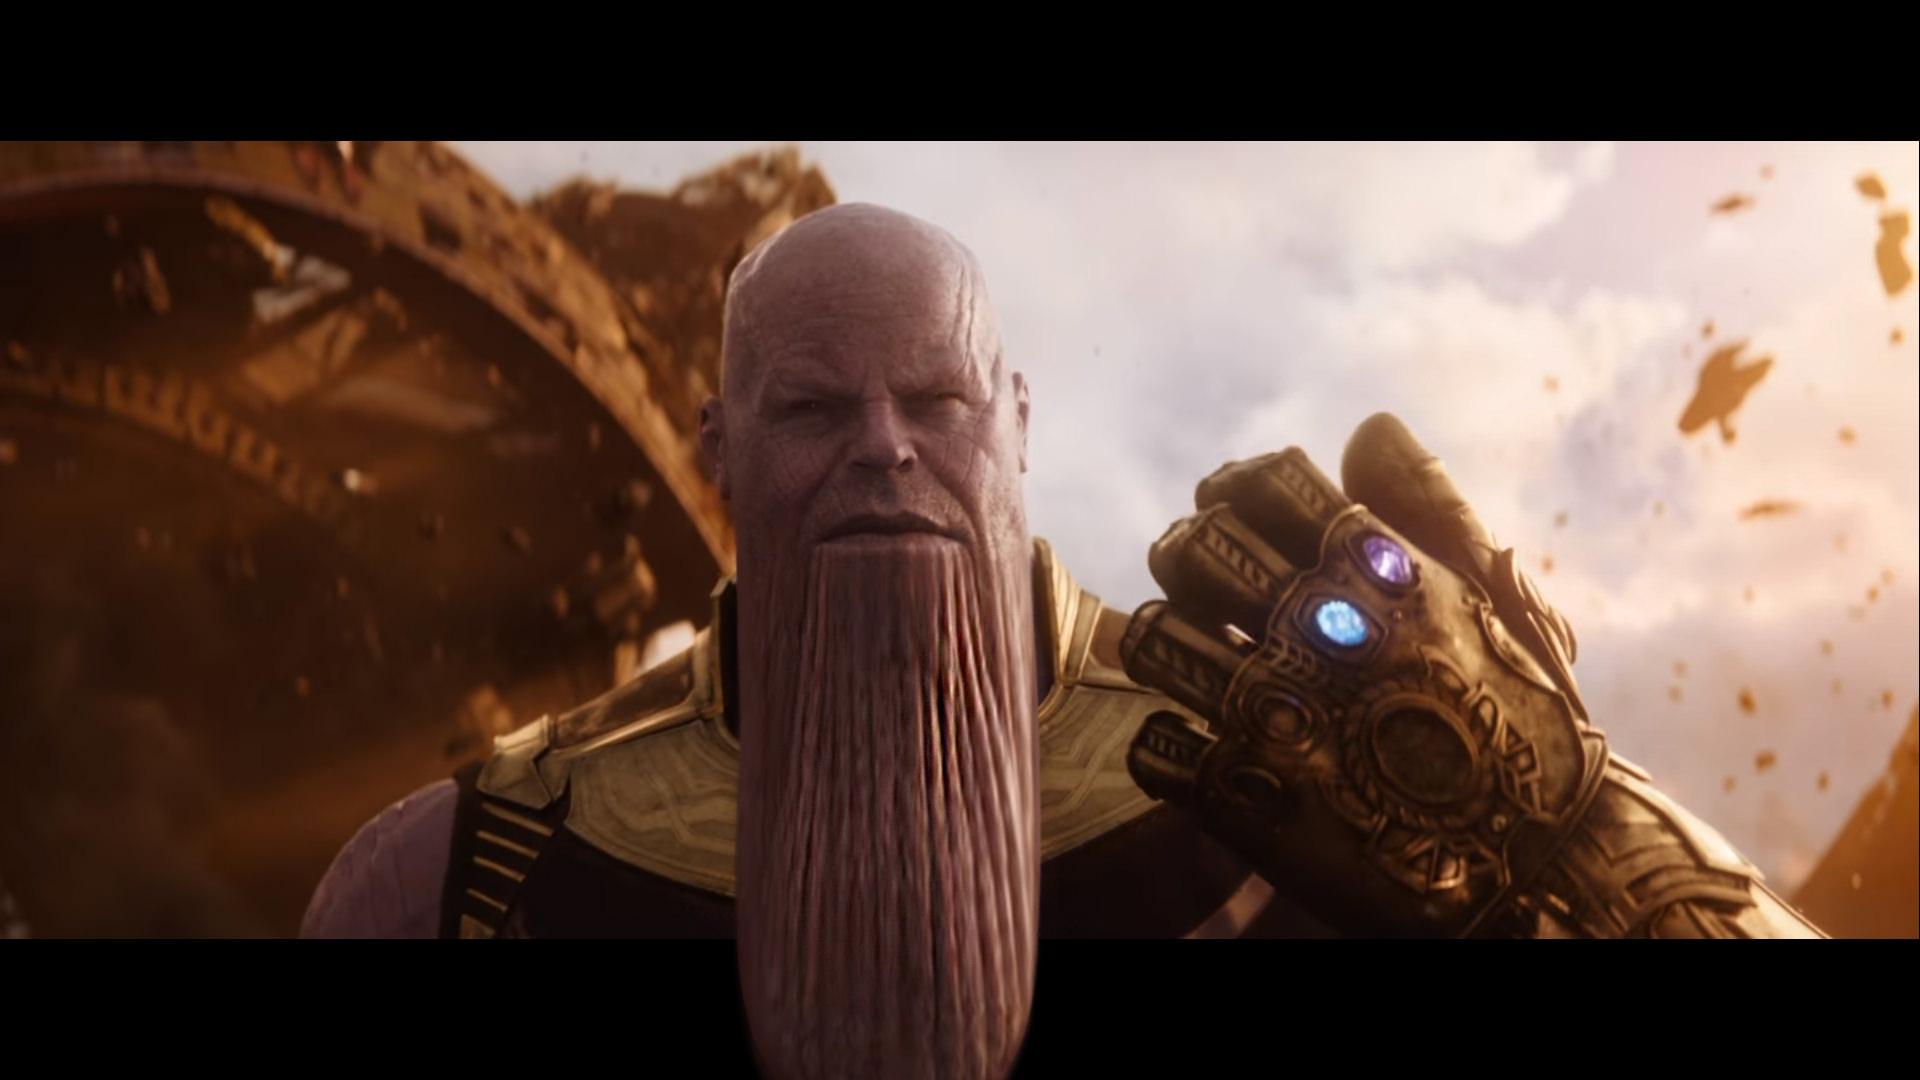 Thanos with a even bigger chin